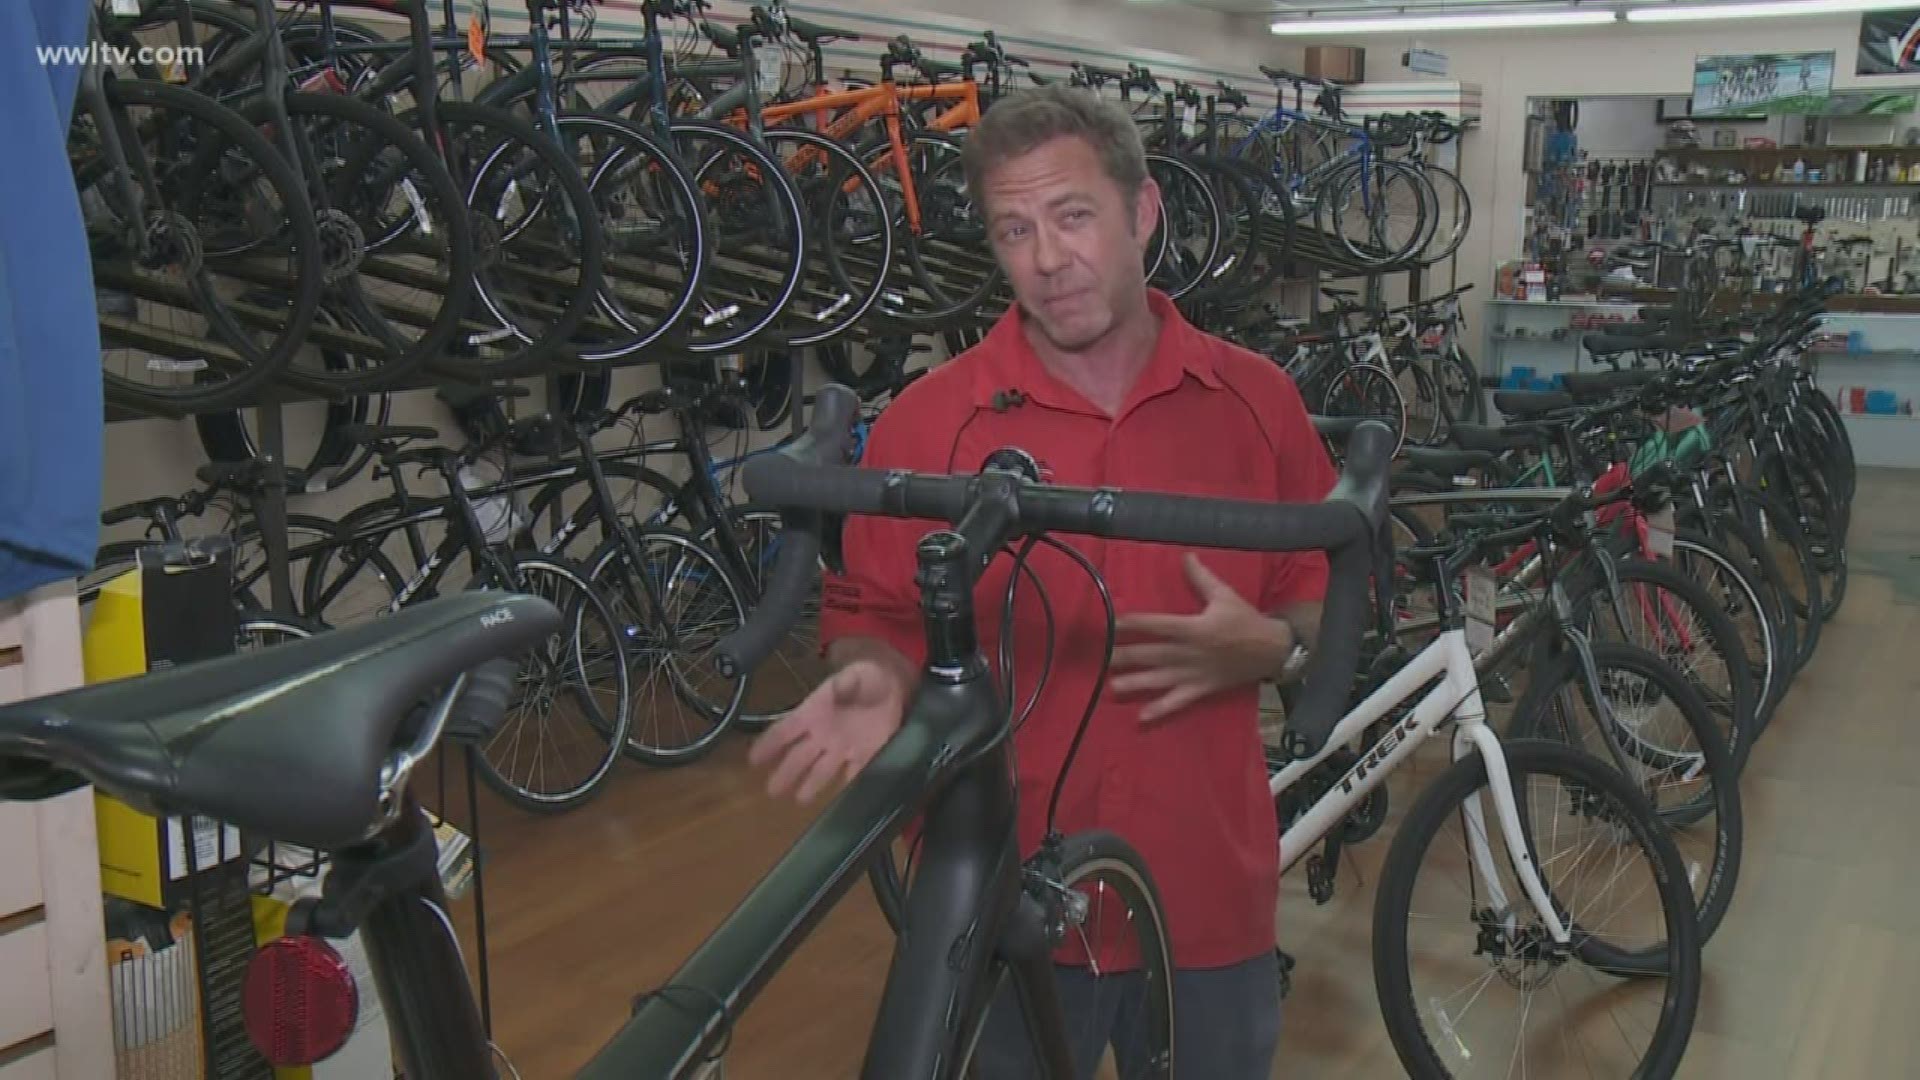 'As soon as they closed the schools, we got busy,' a bike shop owner said